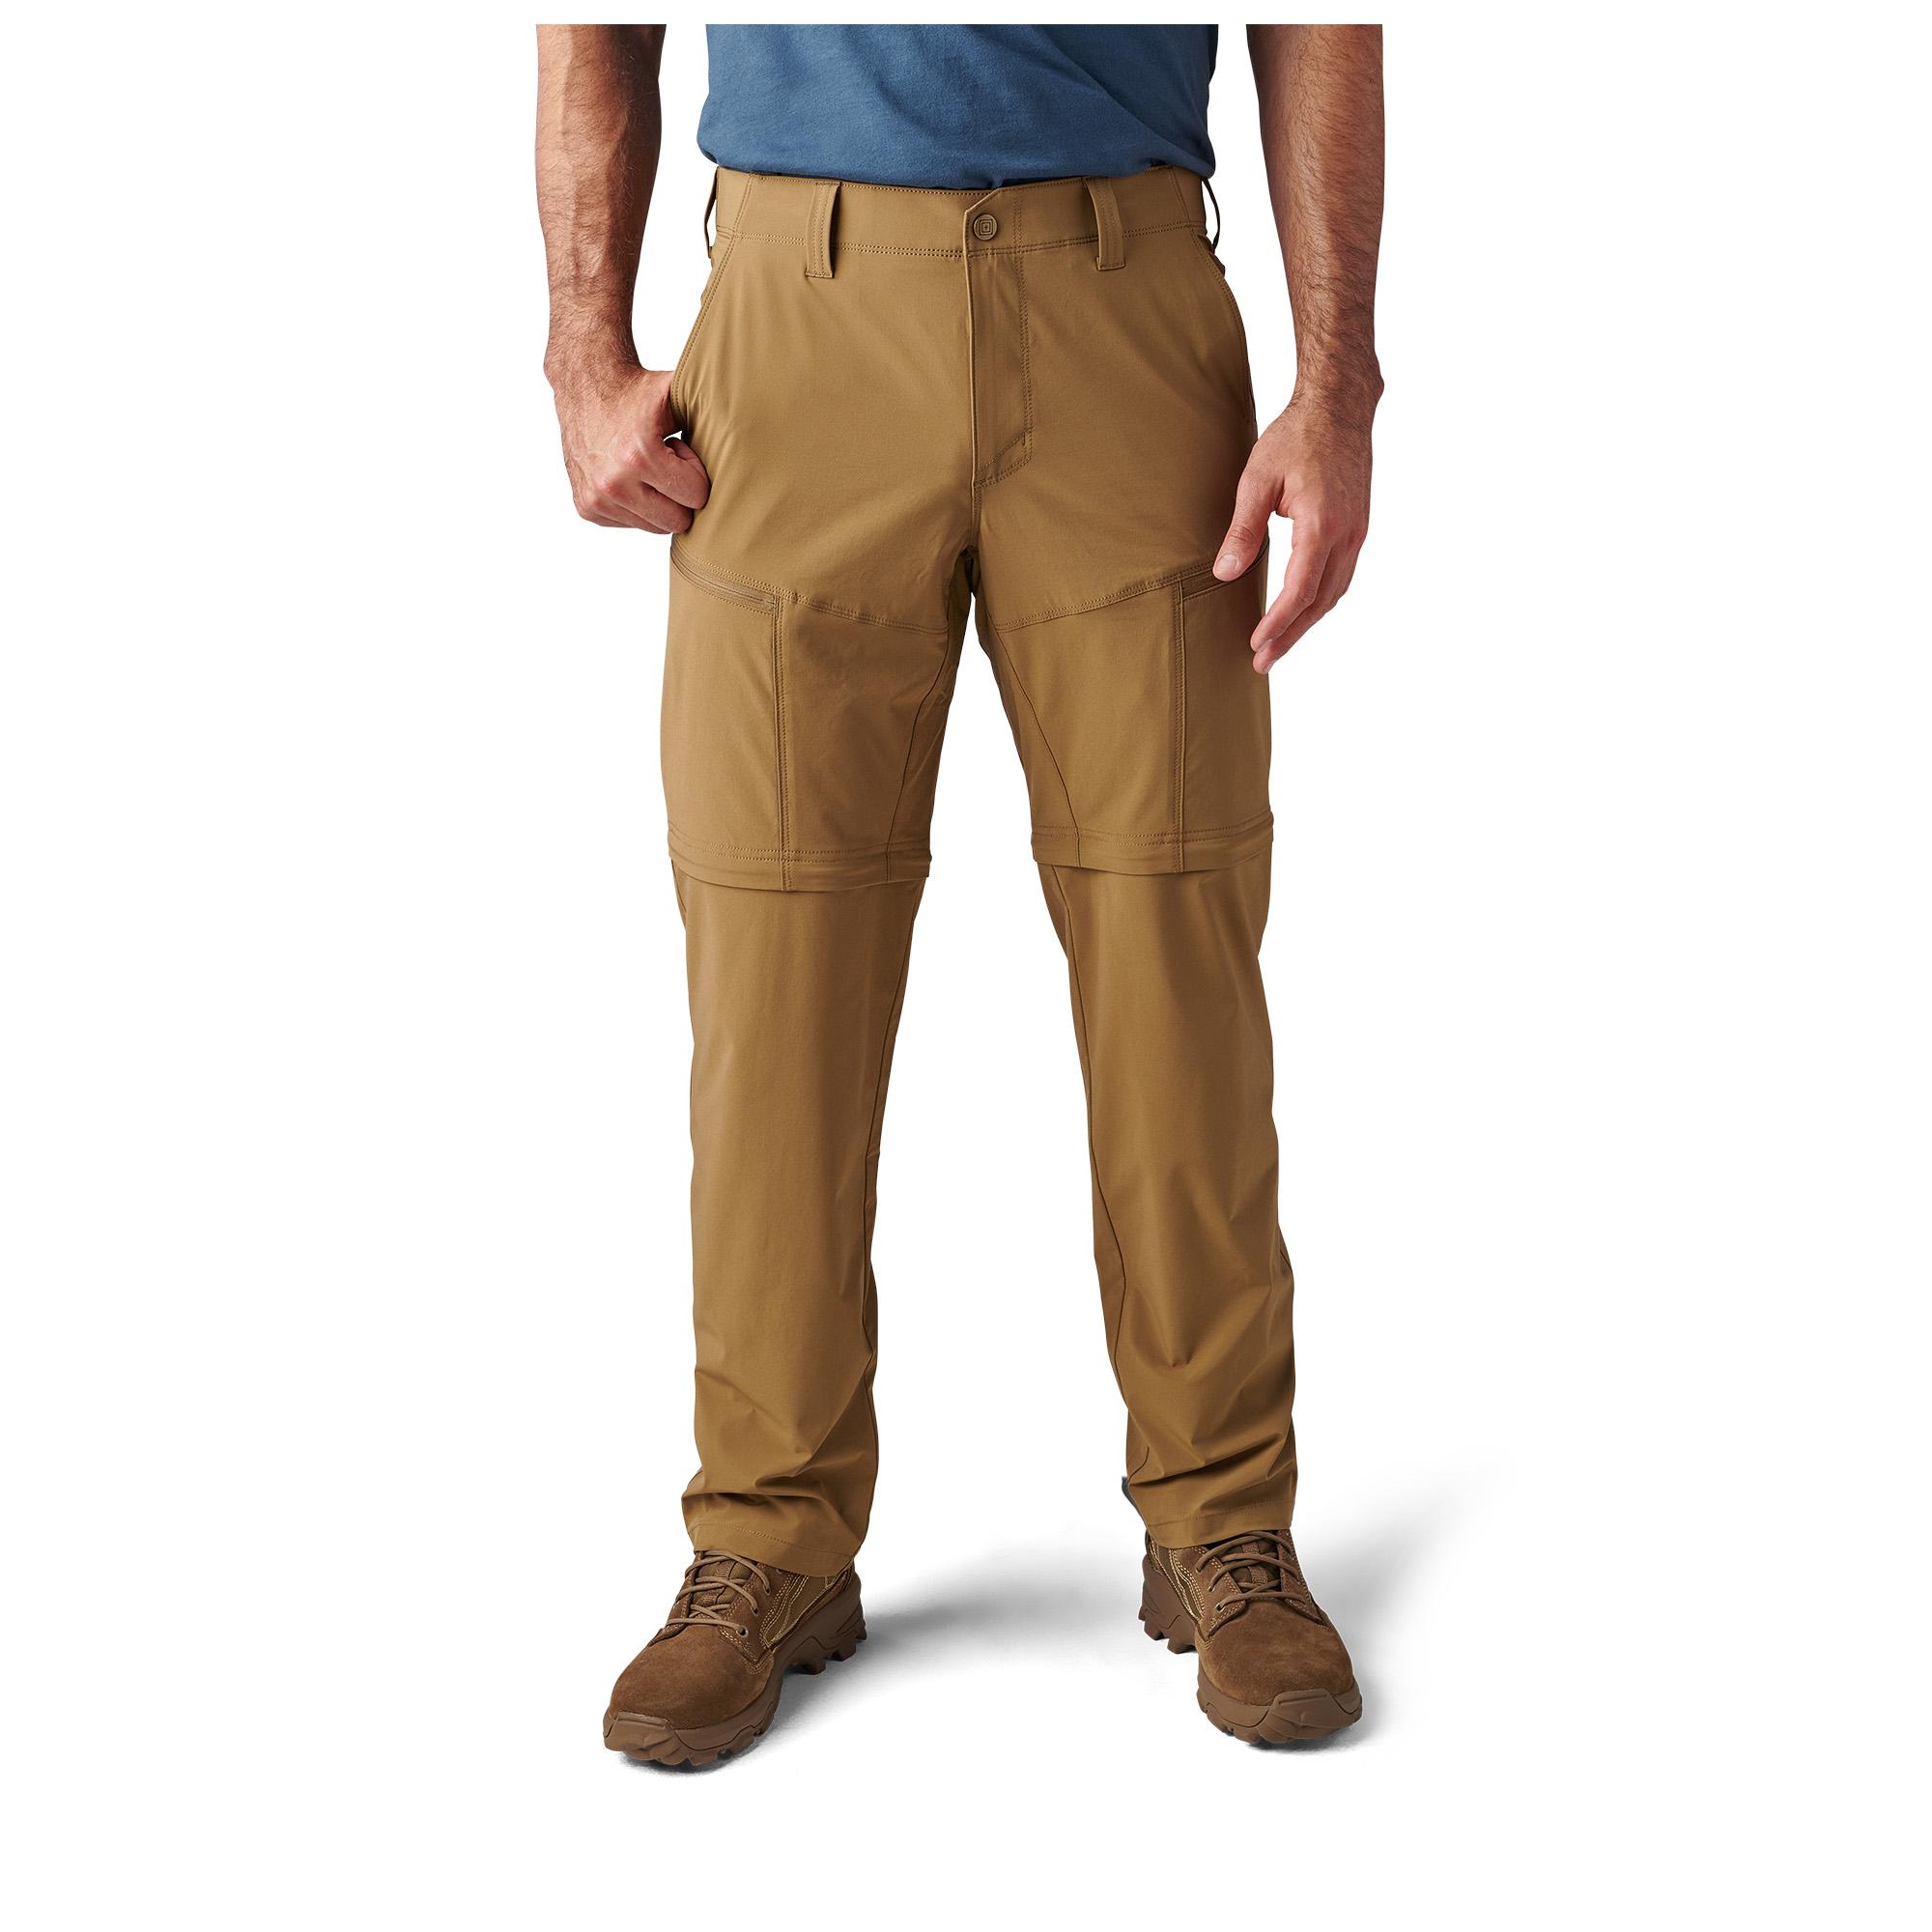 Decoy Convertible Pant: Outdoor Essential